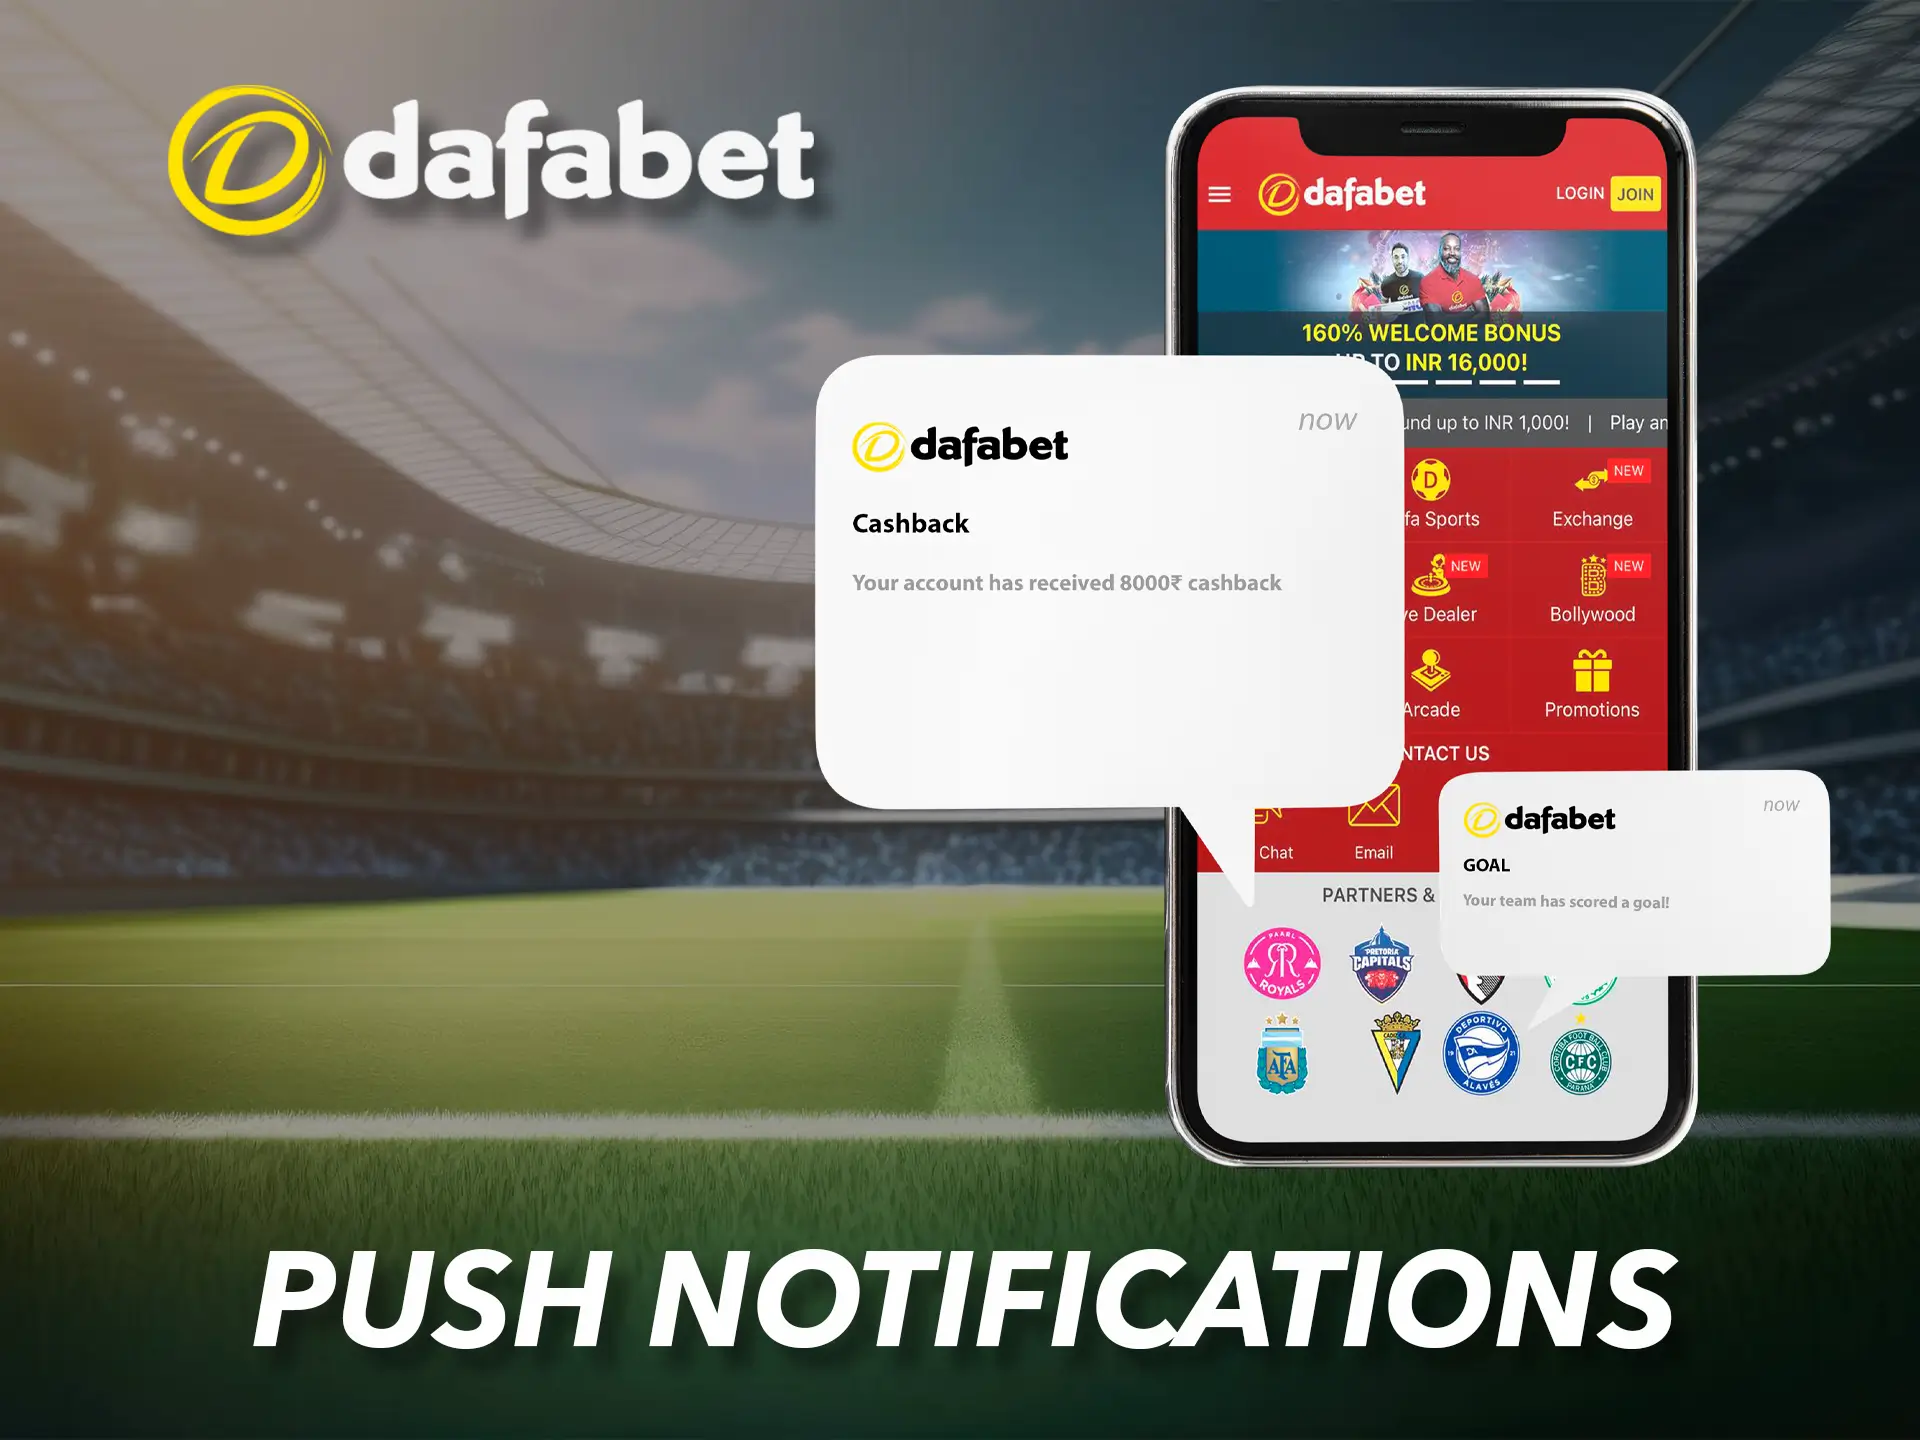 Dafabet will notify you when your team wins a match or scores a goal.